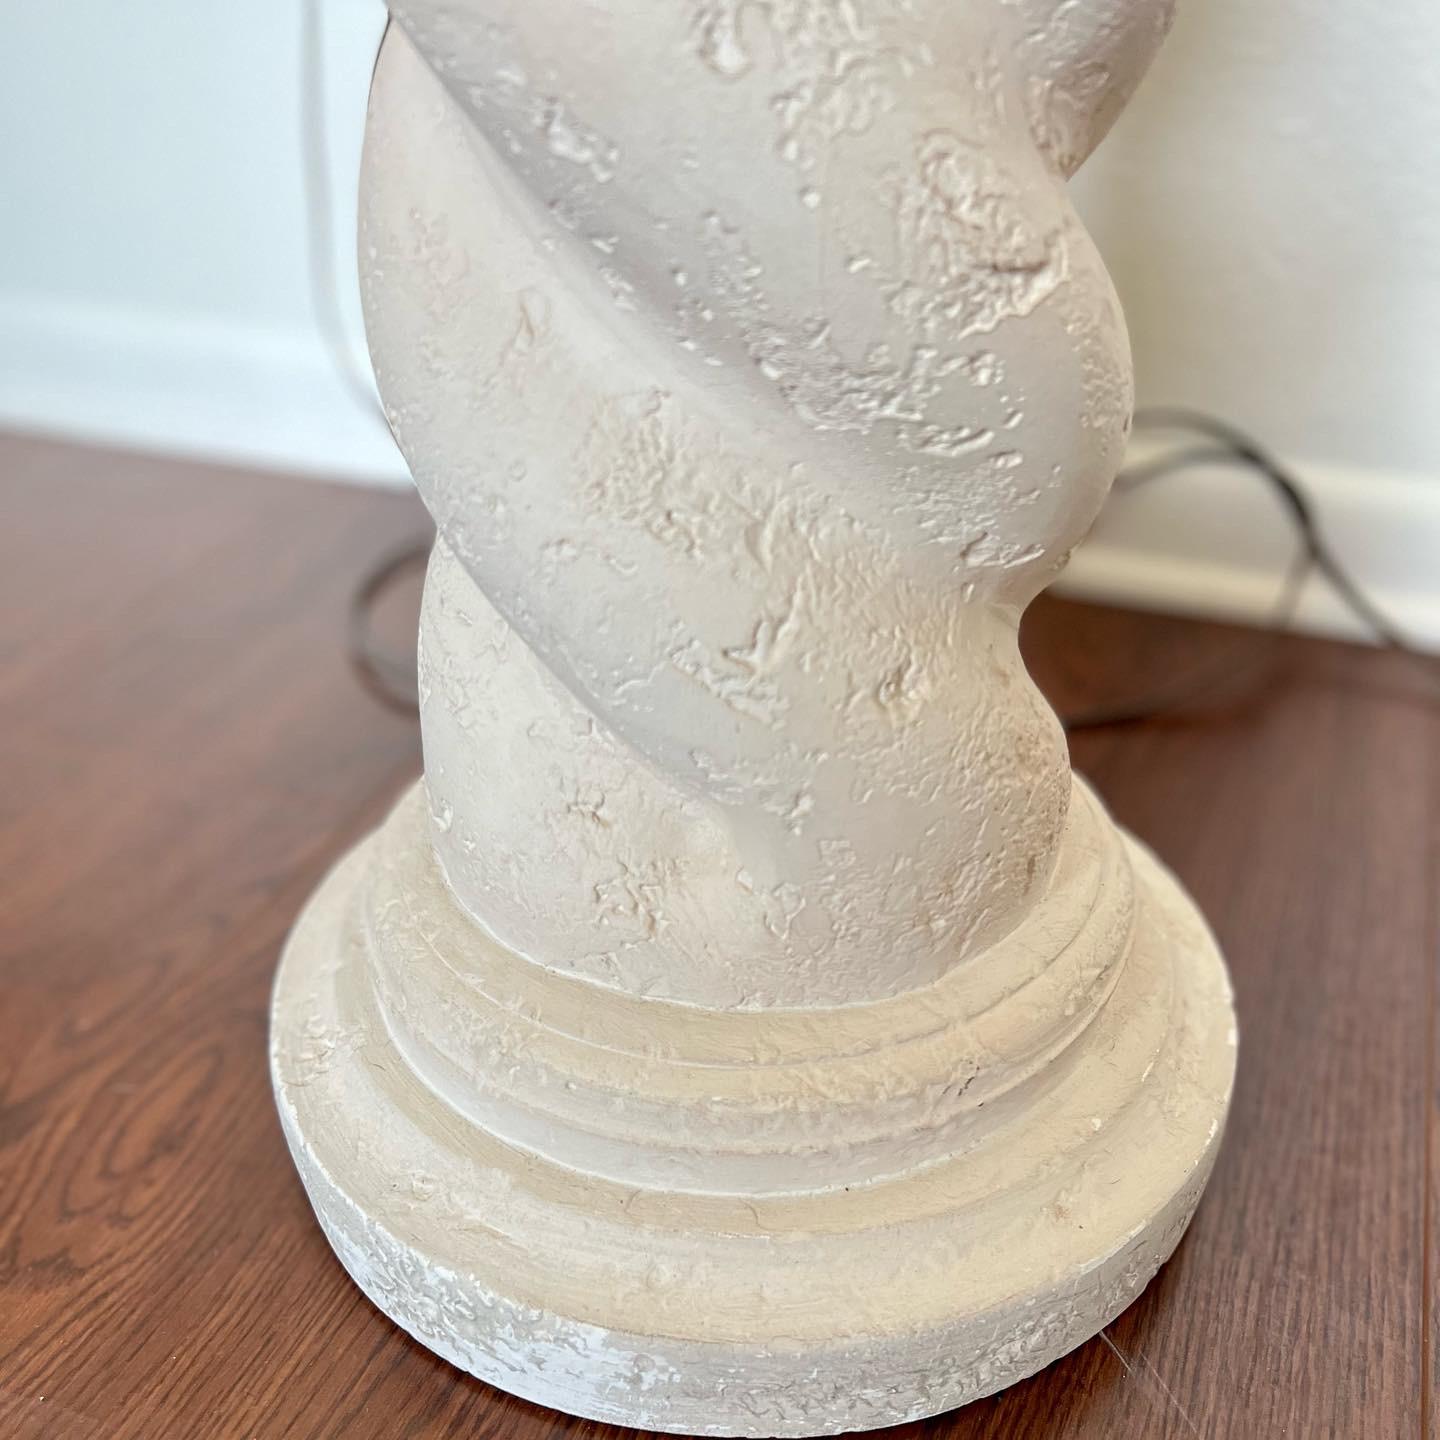 Vintage Michael Taylor style spiral plaster floor lamp and table lamp. Circa 1980's. Chunky textural plaster spiral lamps with original empire shades. Shades are a bit discolored and have some cracks. Plaster is a natural off white color, and in